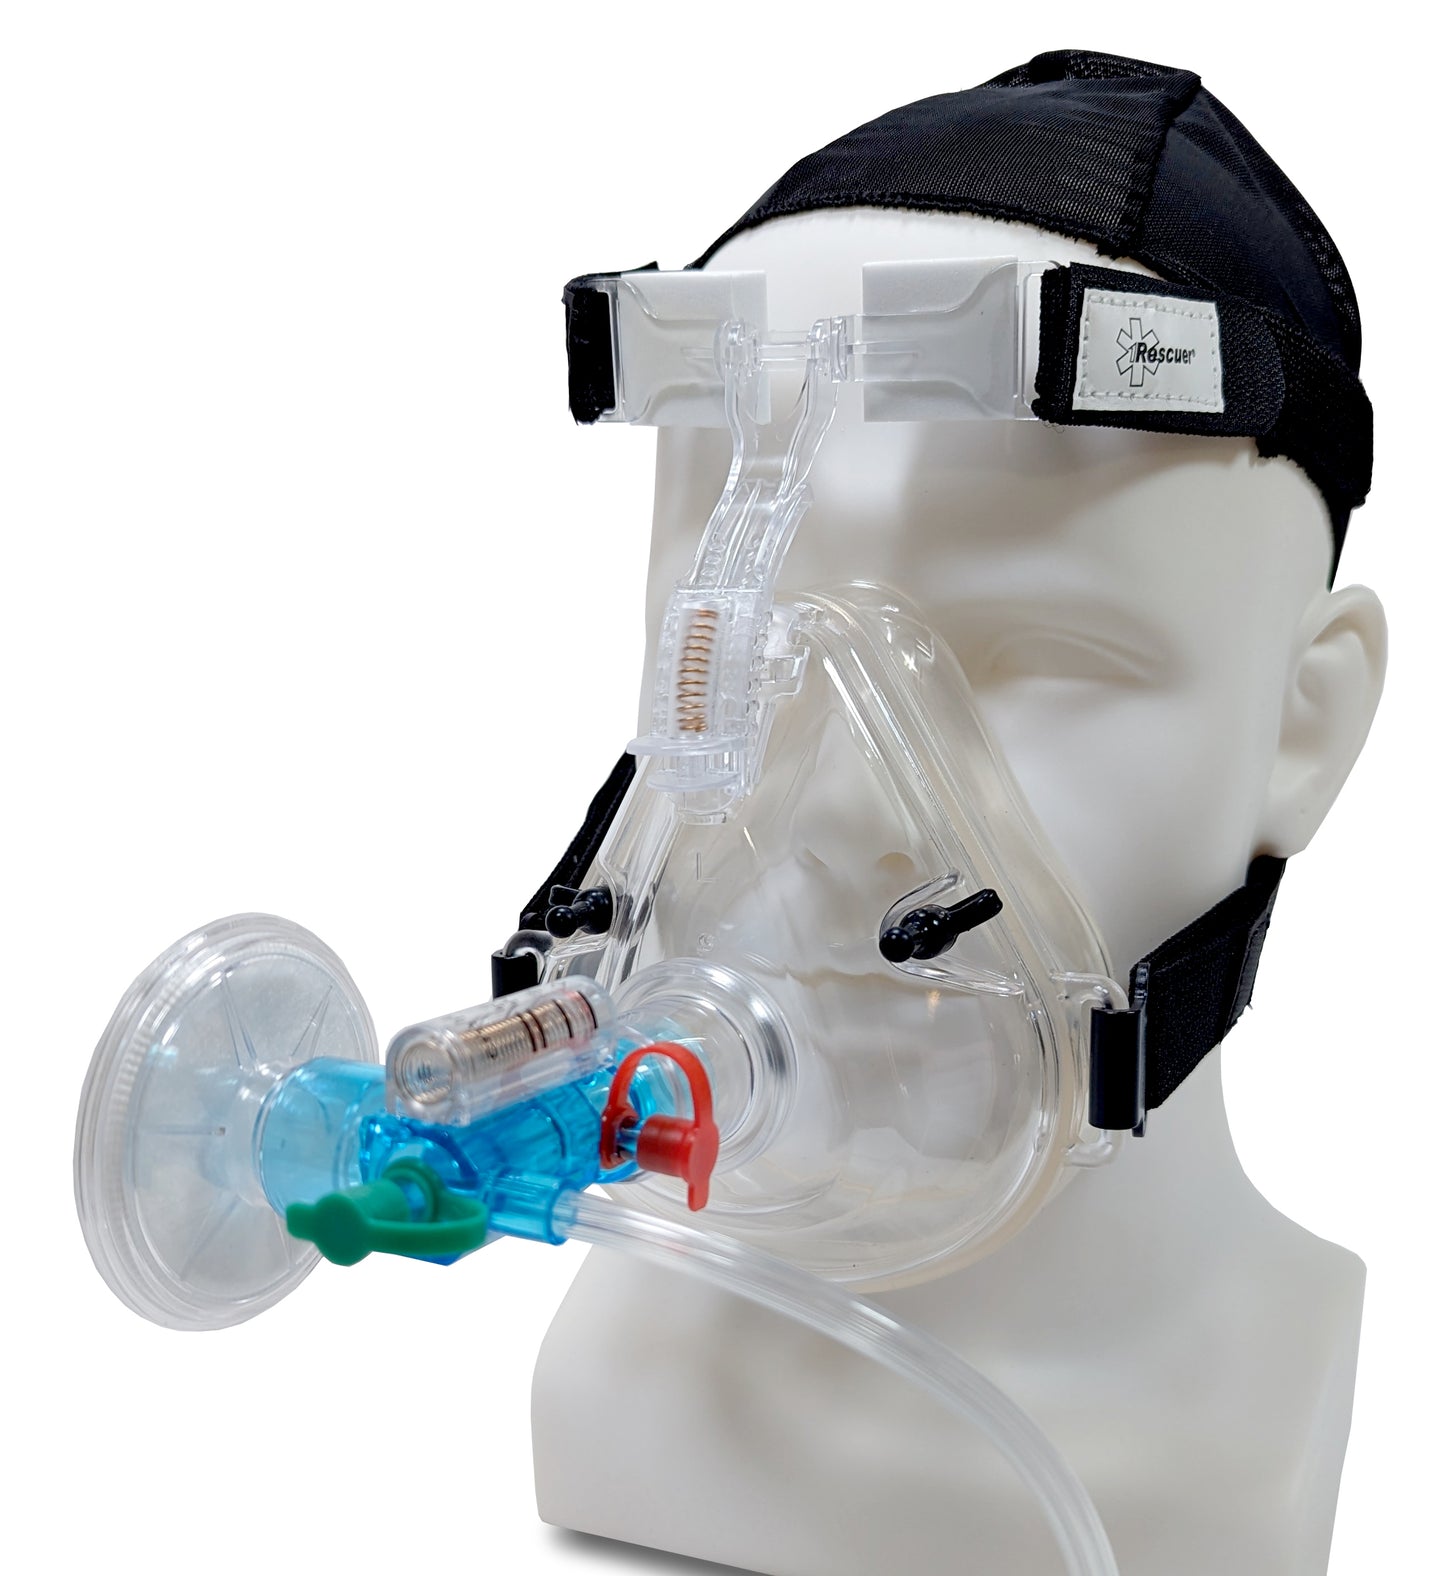 Rescuer® II 8805 - Compact CPAP system with adjustable medium CPAP mask